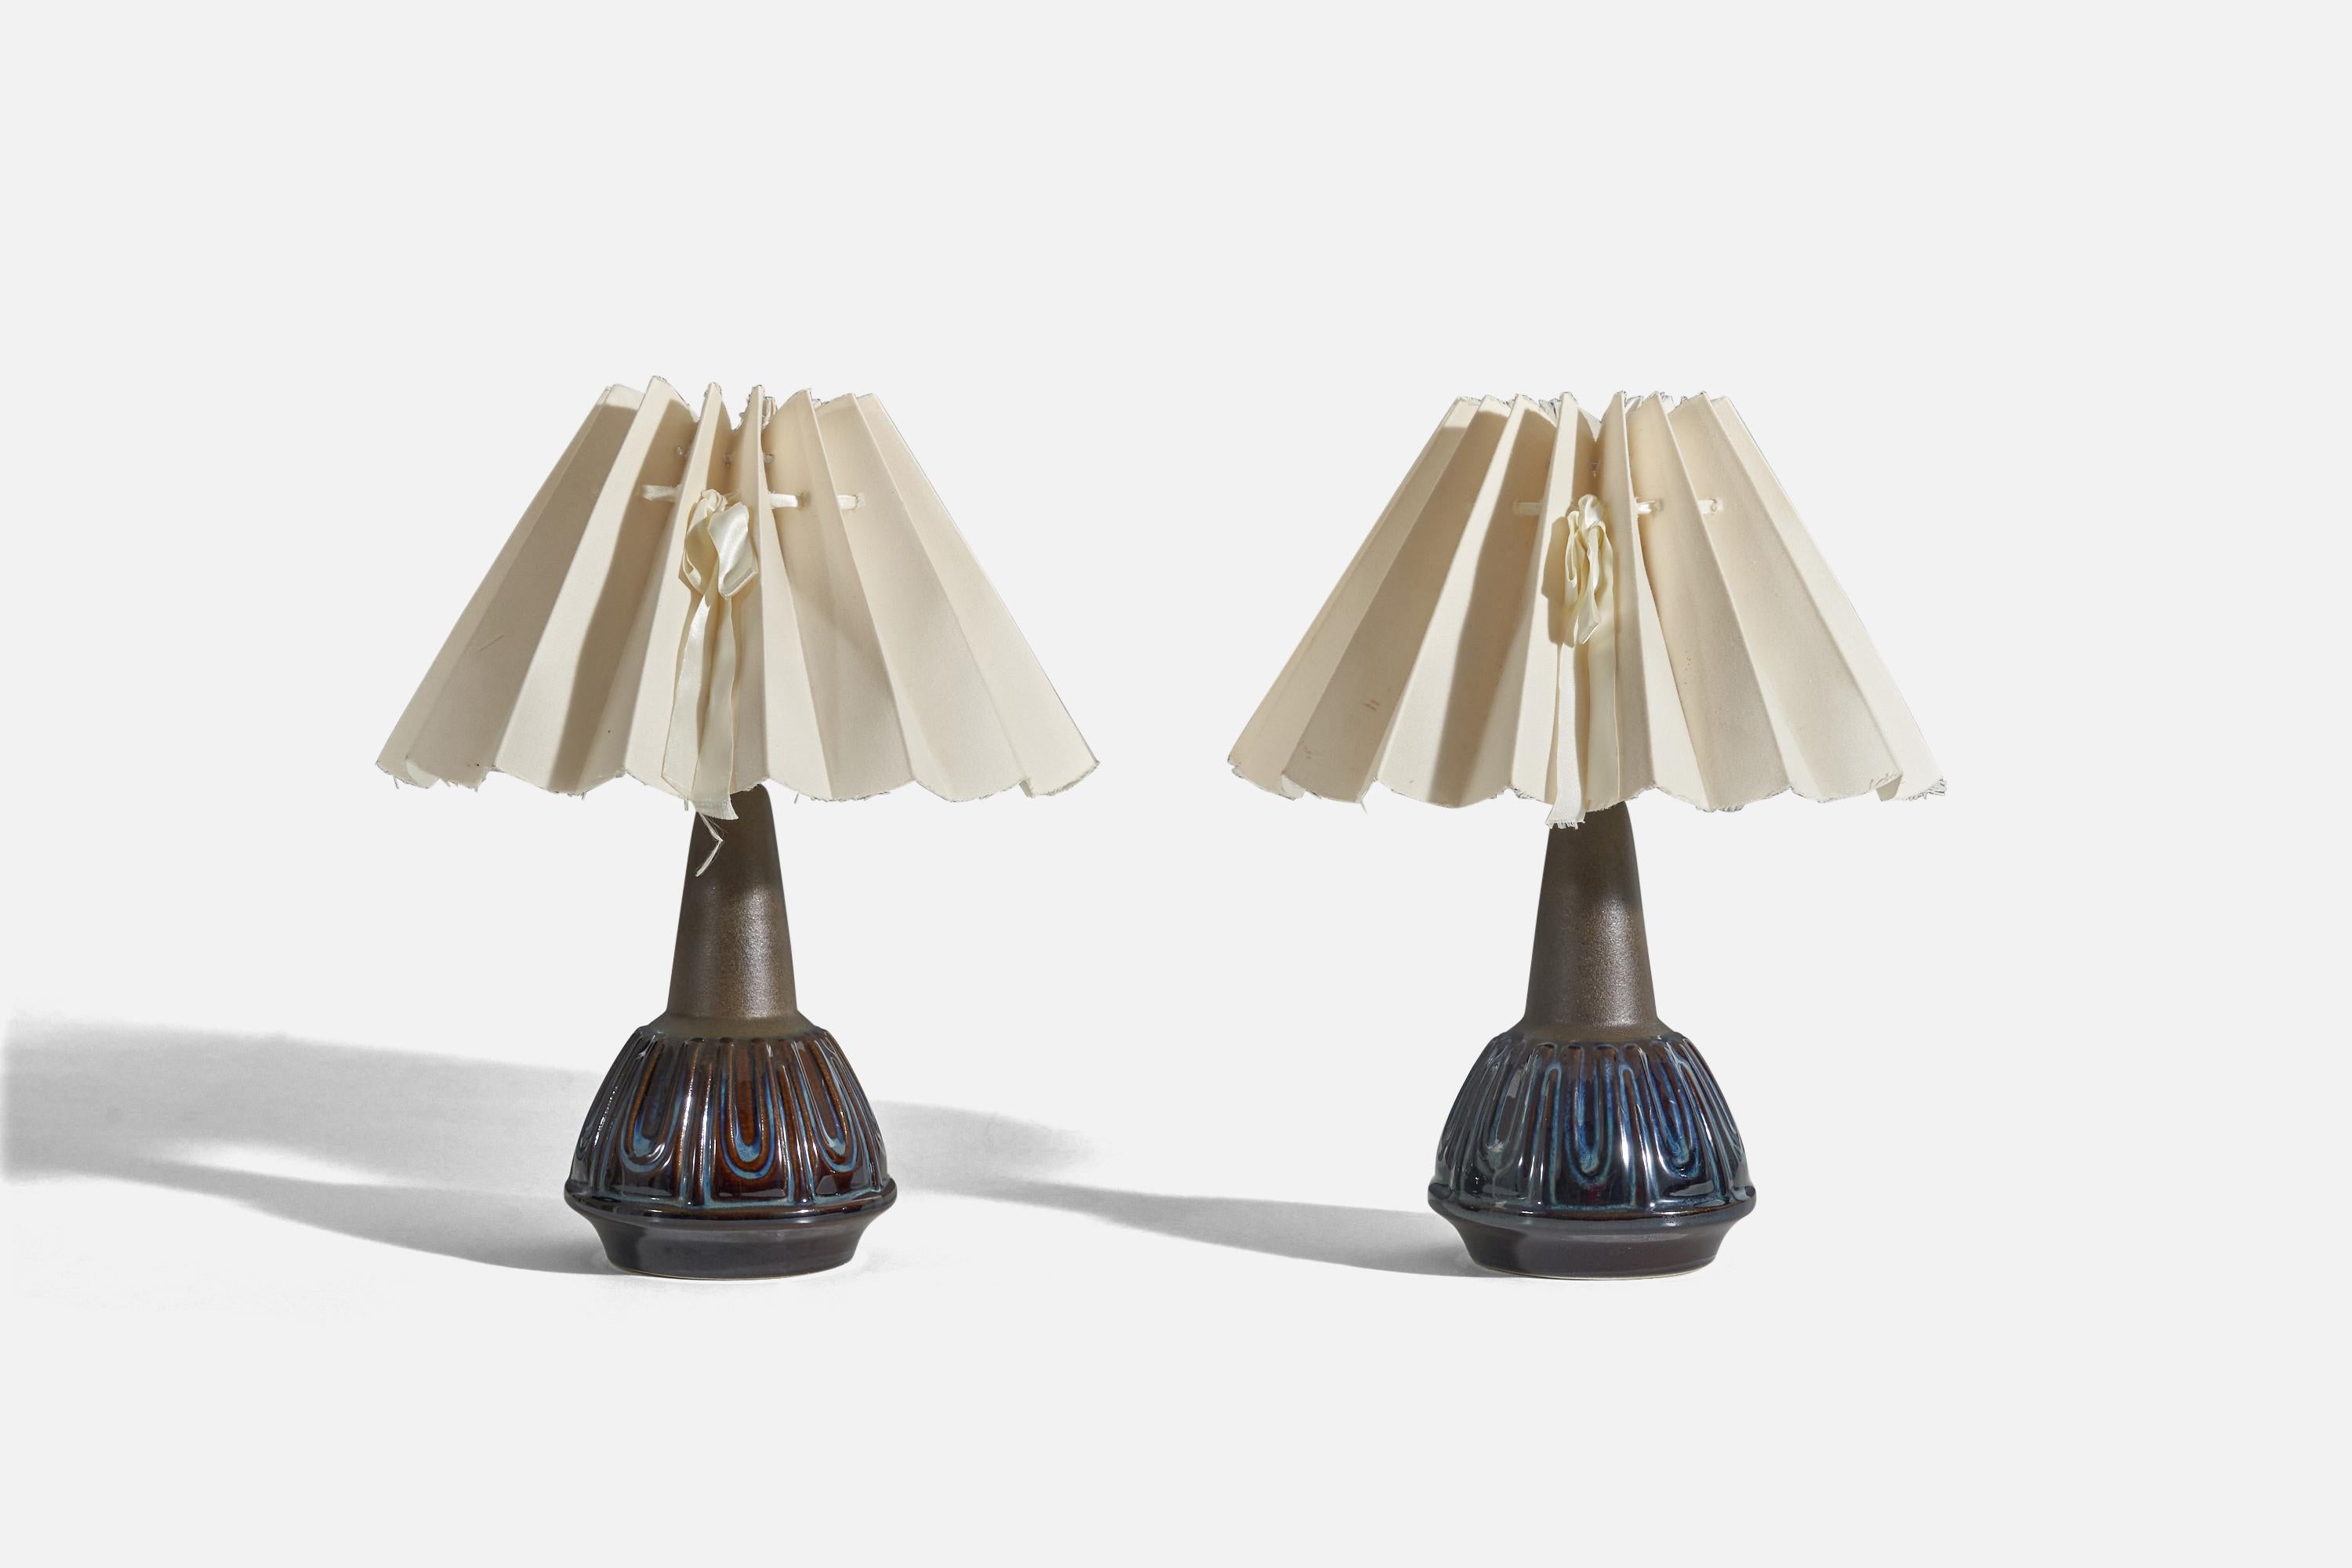 A pair of blue and brown, glazed stoneware and fabric table lamps designed and produced by Søholm Stentøj, Bornholm, Denmark, 1960s. 

Sold with lampshades. 
Dimensions of lamp (inches) : 8.87 x 4.51 x 4.51 (Height x Width x Depth)
Dimensions of